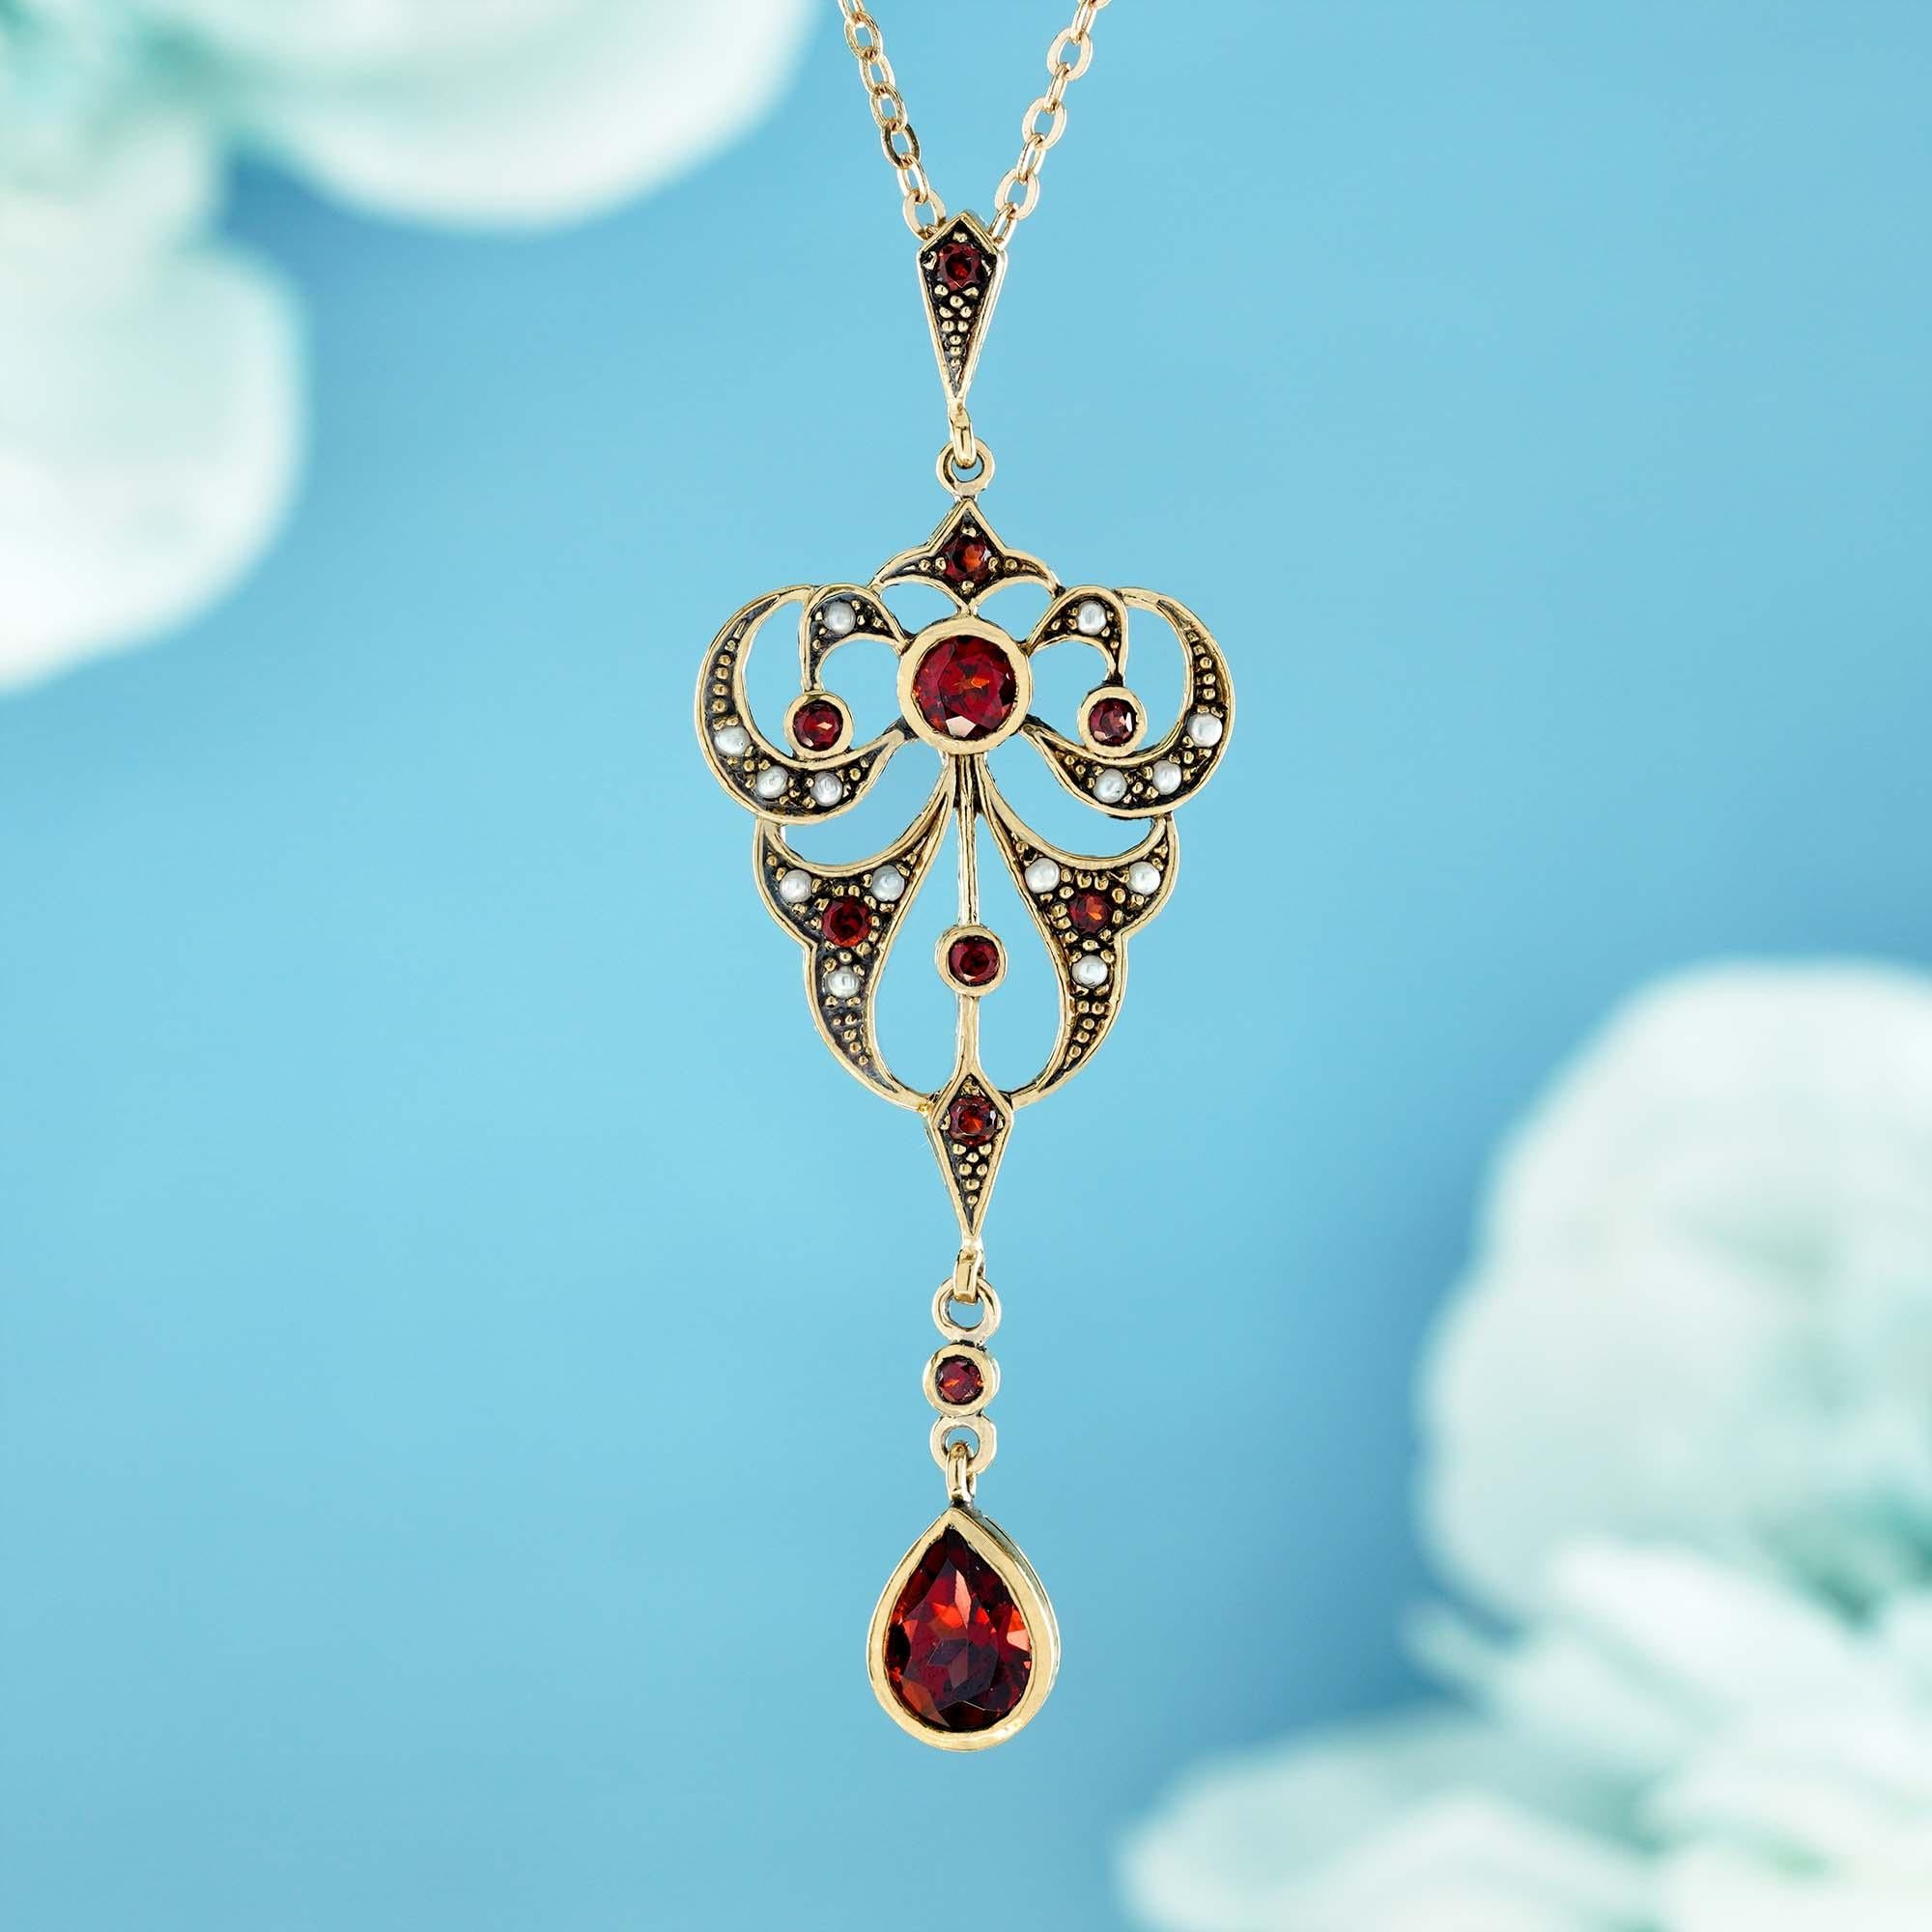 Add a delicate and unique aesthetic to your look with this pendant by GEMMA FILIGREE. Our antique design gold pendant equate to delicacy and light openwork, while maintains strength for everyday wear for a lifetime.

CHARACTERISTICS
Status: Made to